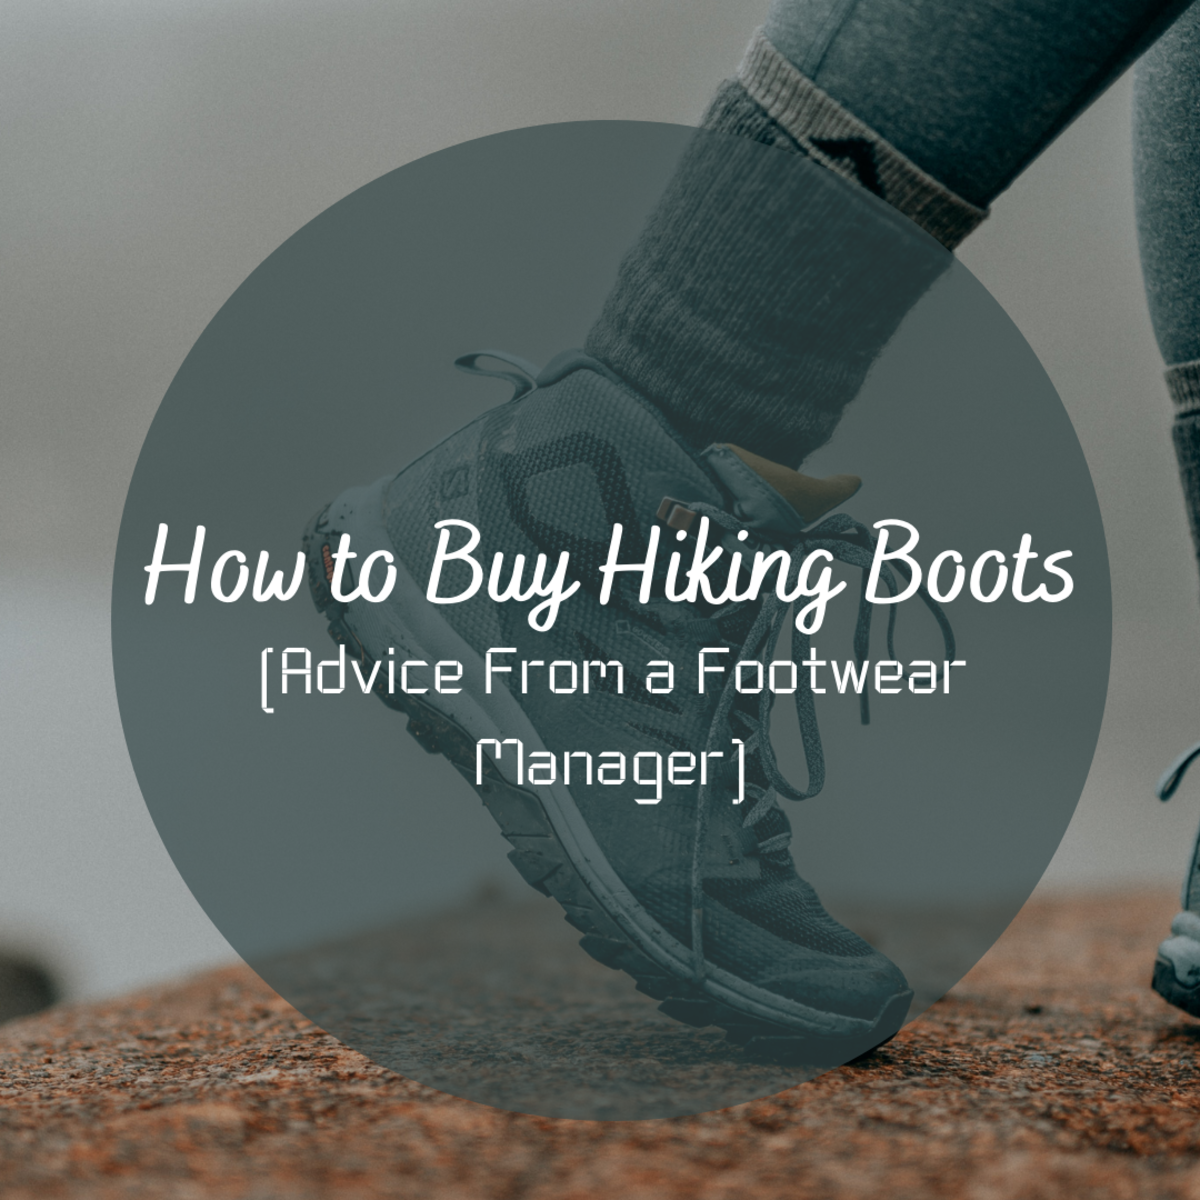 How to Buy Hiking Boots